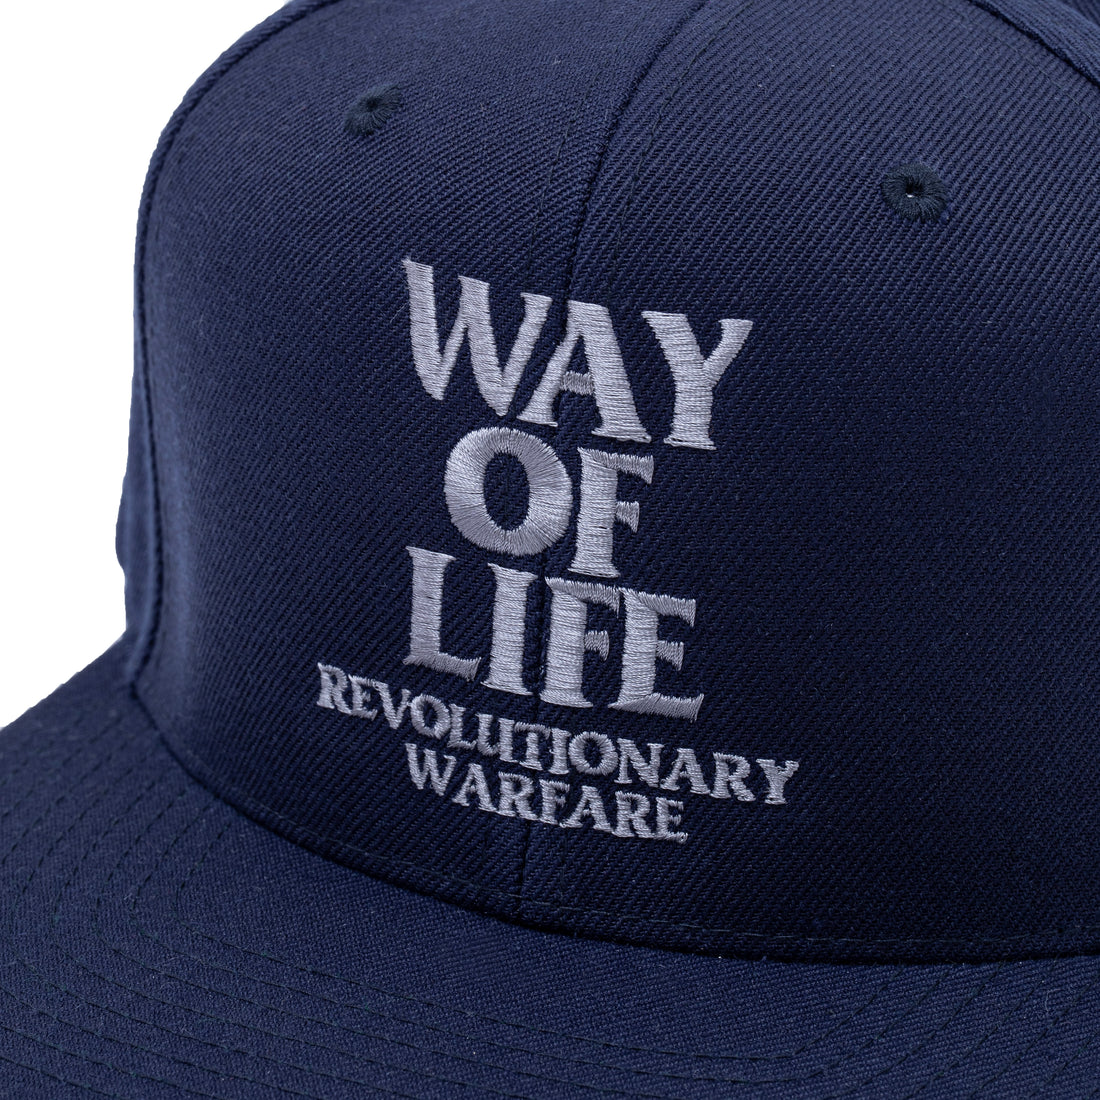 [RATS]EMBROIDERY CAP (WAY OF LIFE)/NAVY/SILVER GRAY